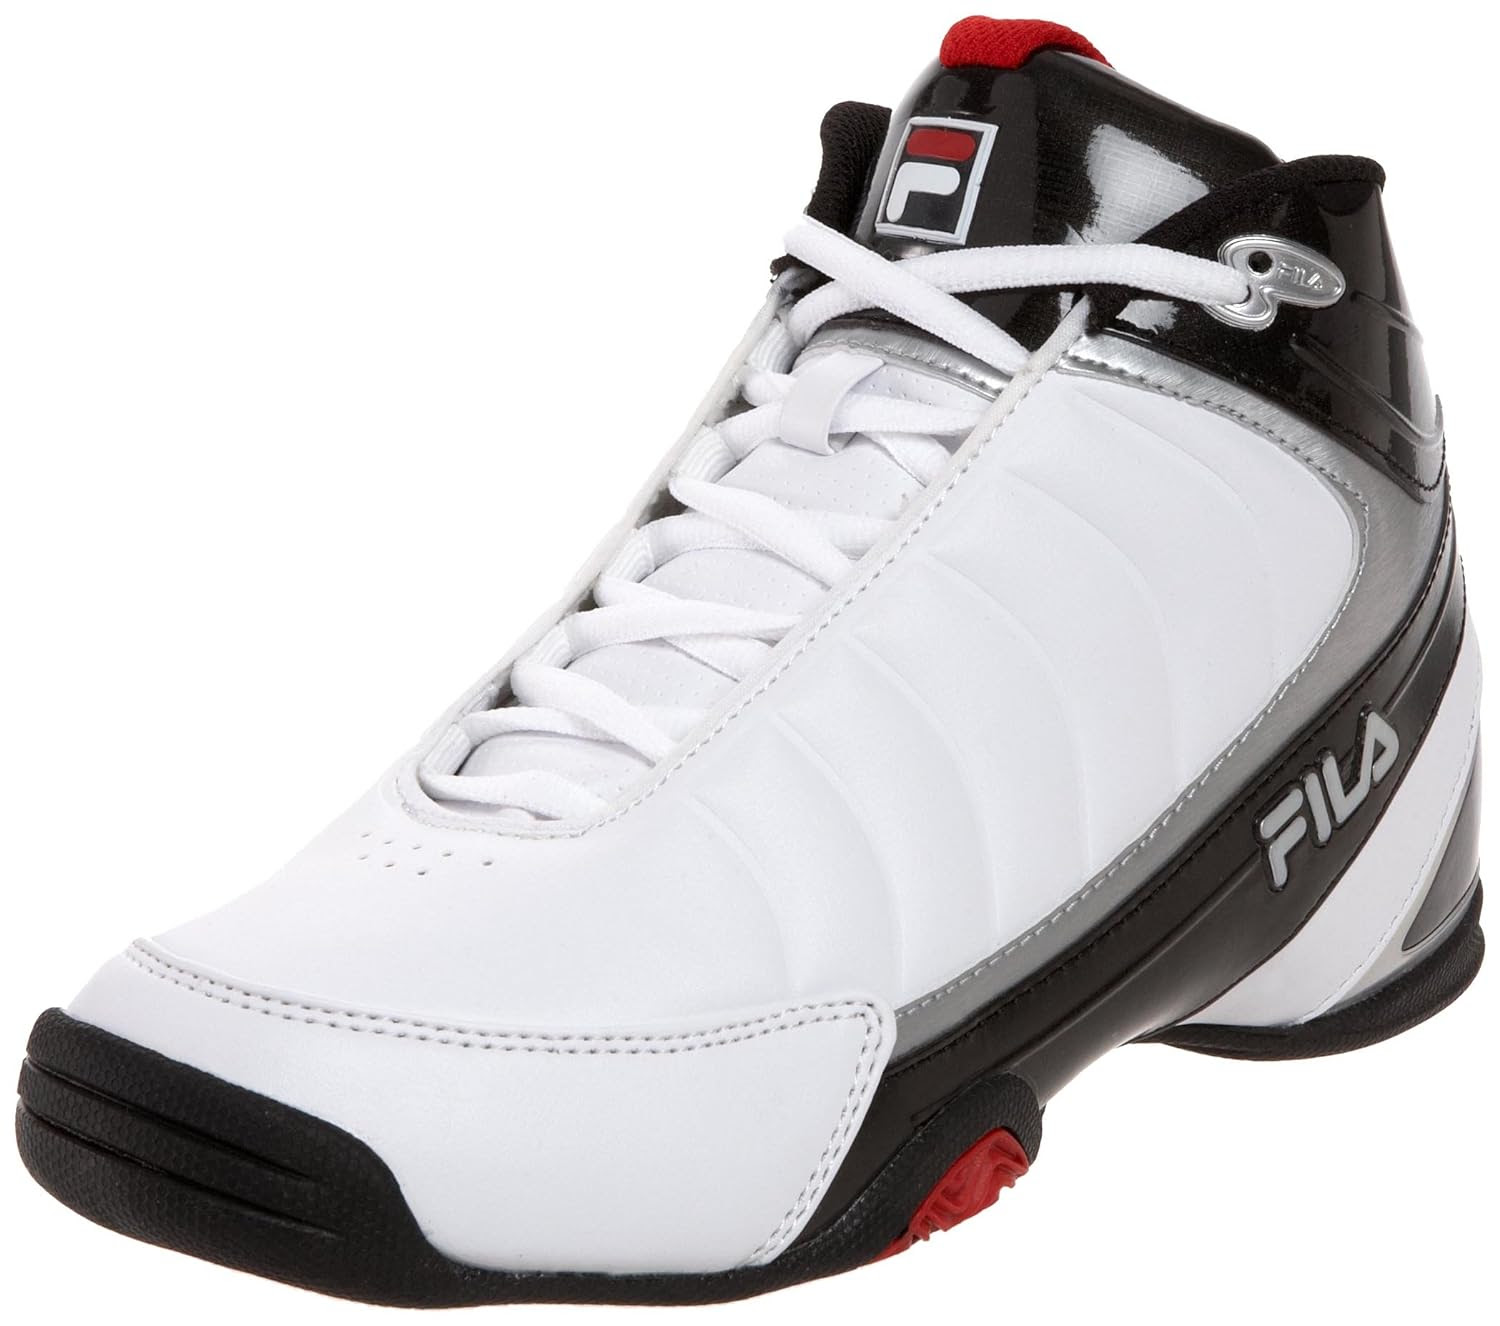 Fila Men's DLS Game White Sports Shoes - Basketball Shoes Websites